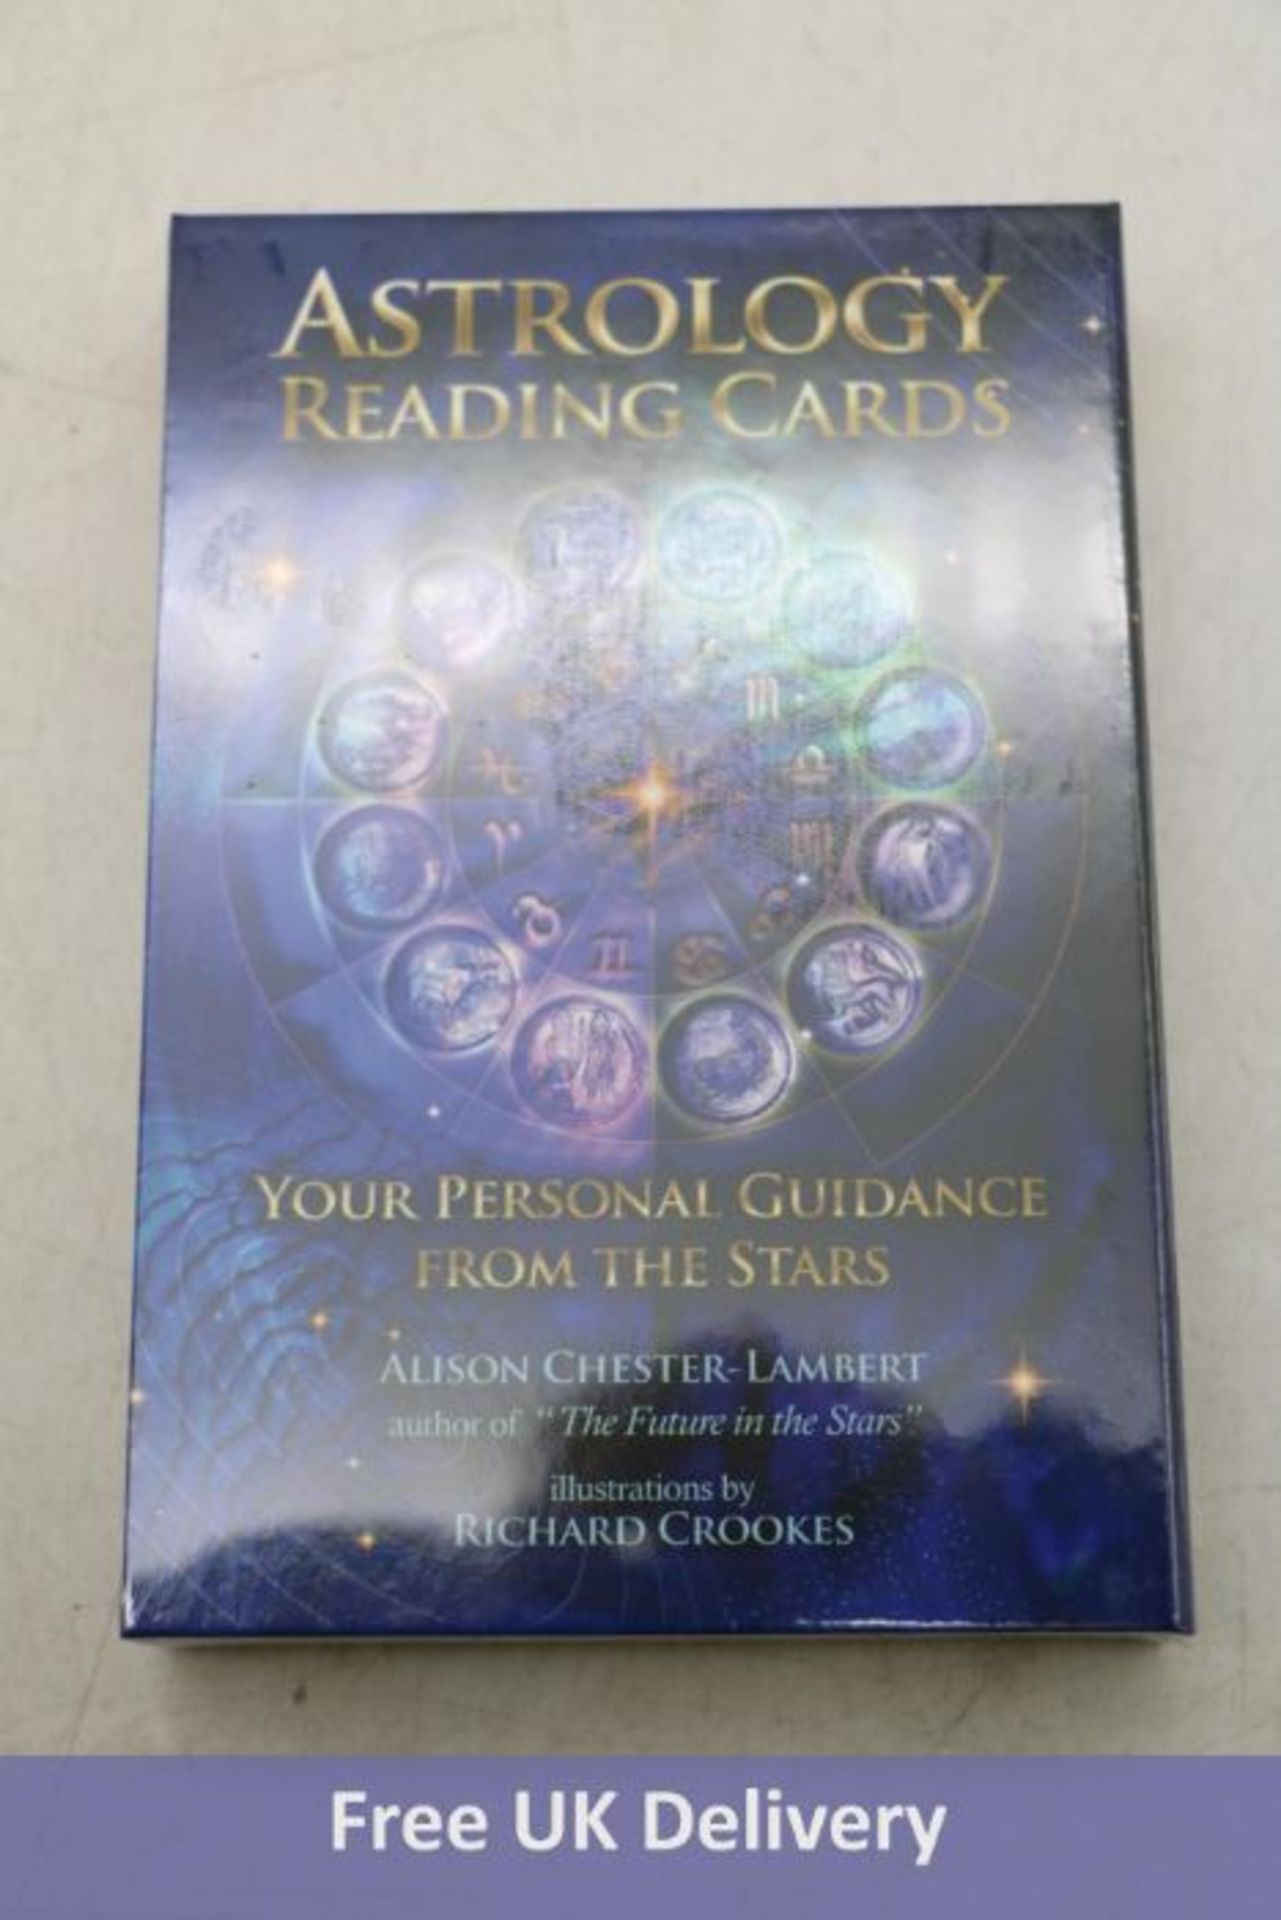 Five Astrology Reading Cards, Your Personal Guidance From the Stars, Purple